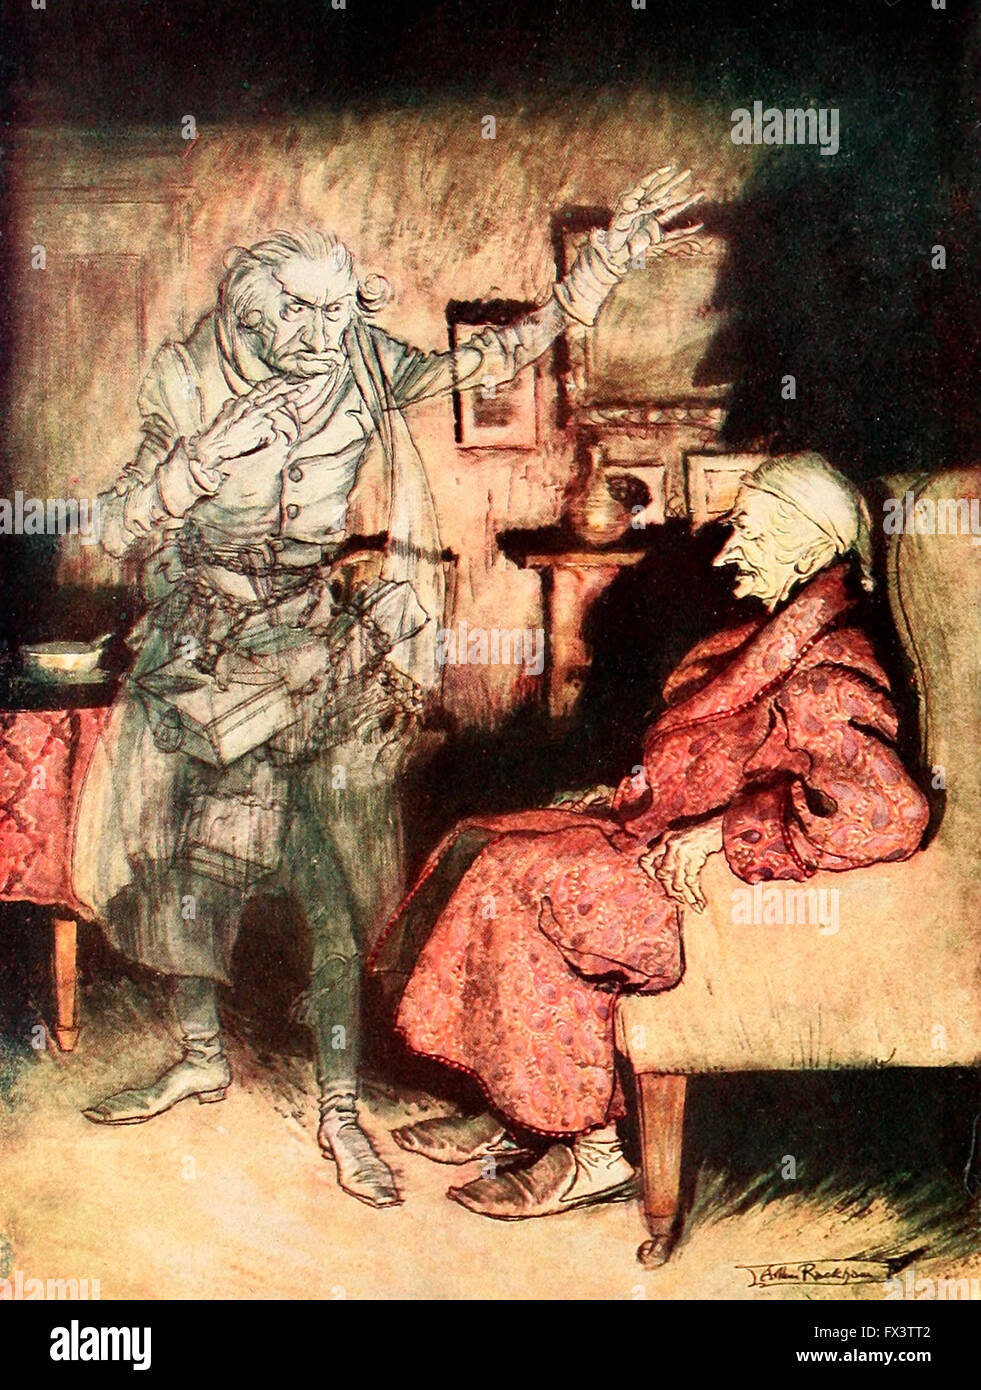 'How, now?' said Scrooge, caustic and cold as ever. 'What do you want with me?' A scene from A Christmas Carol Stock Photo